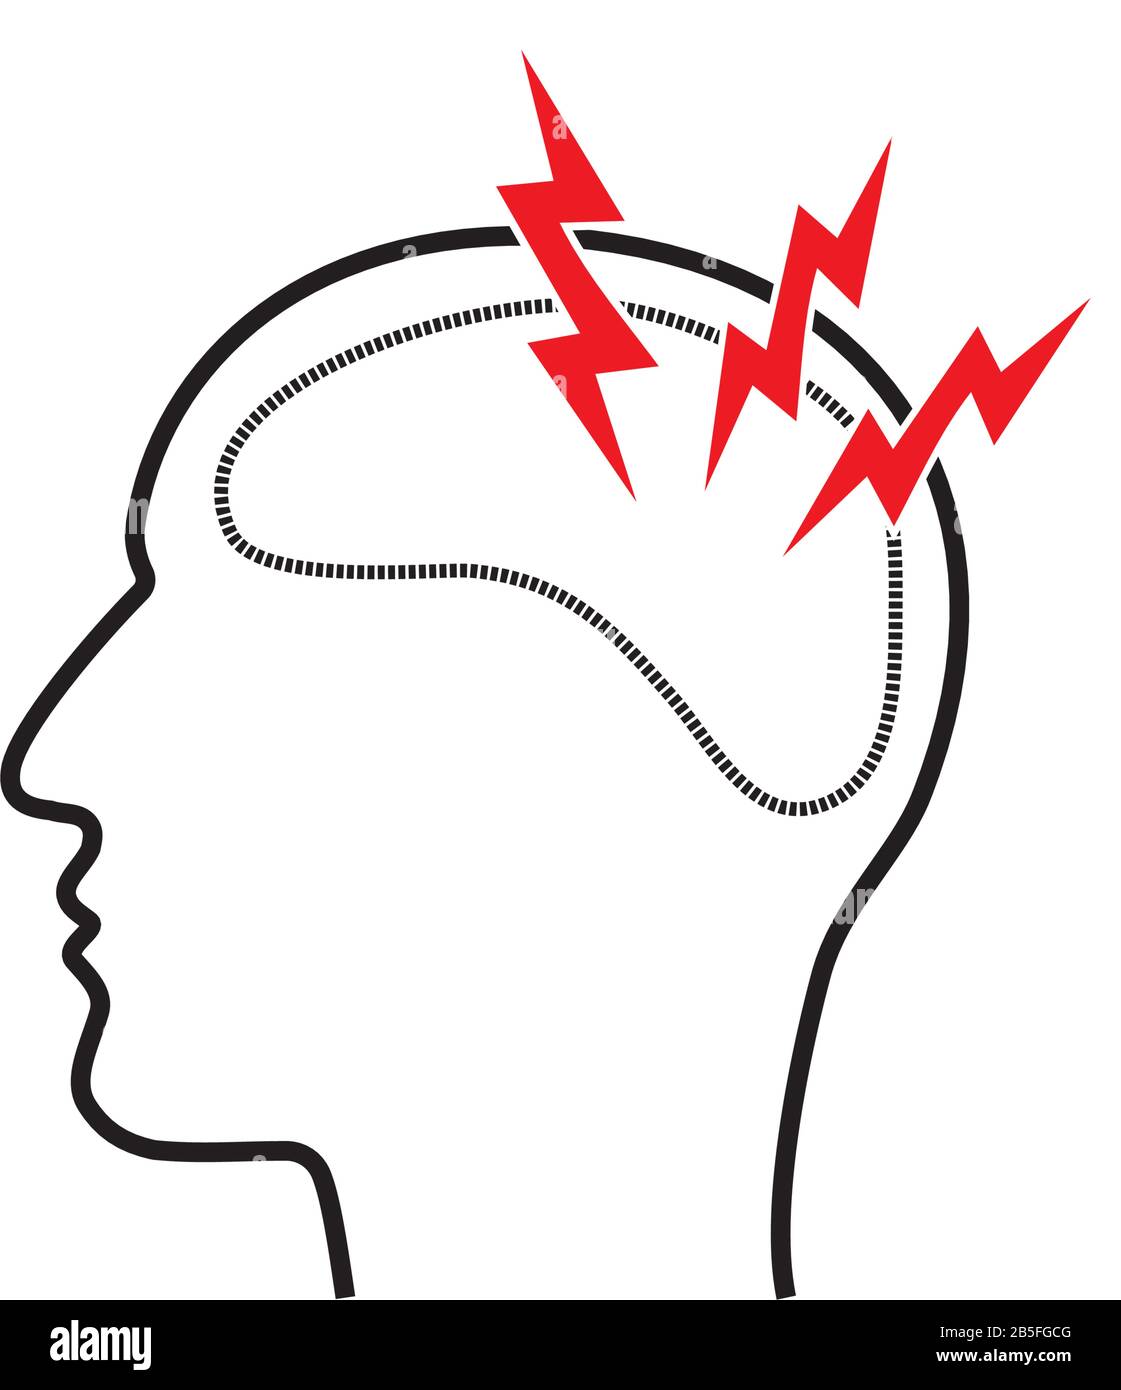 Migraine headache pain and central nervous system disease image concept. Human head profile outline with three red  lightnings in white background. Ve Stock Vector